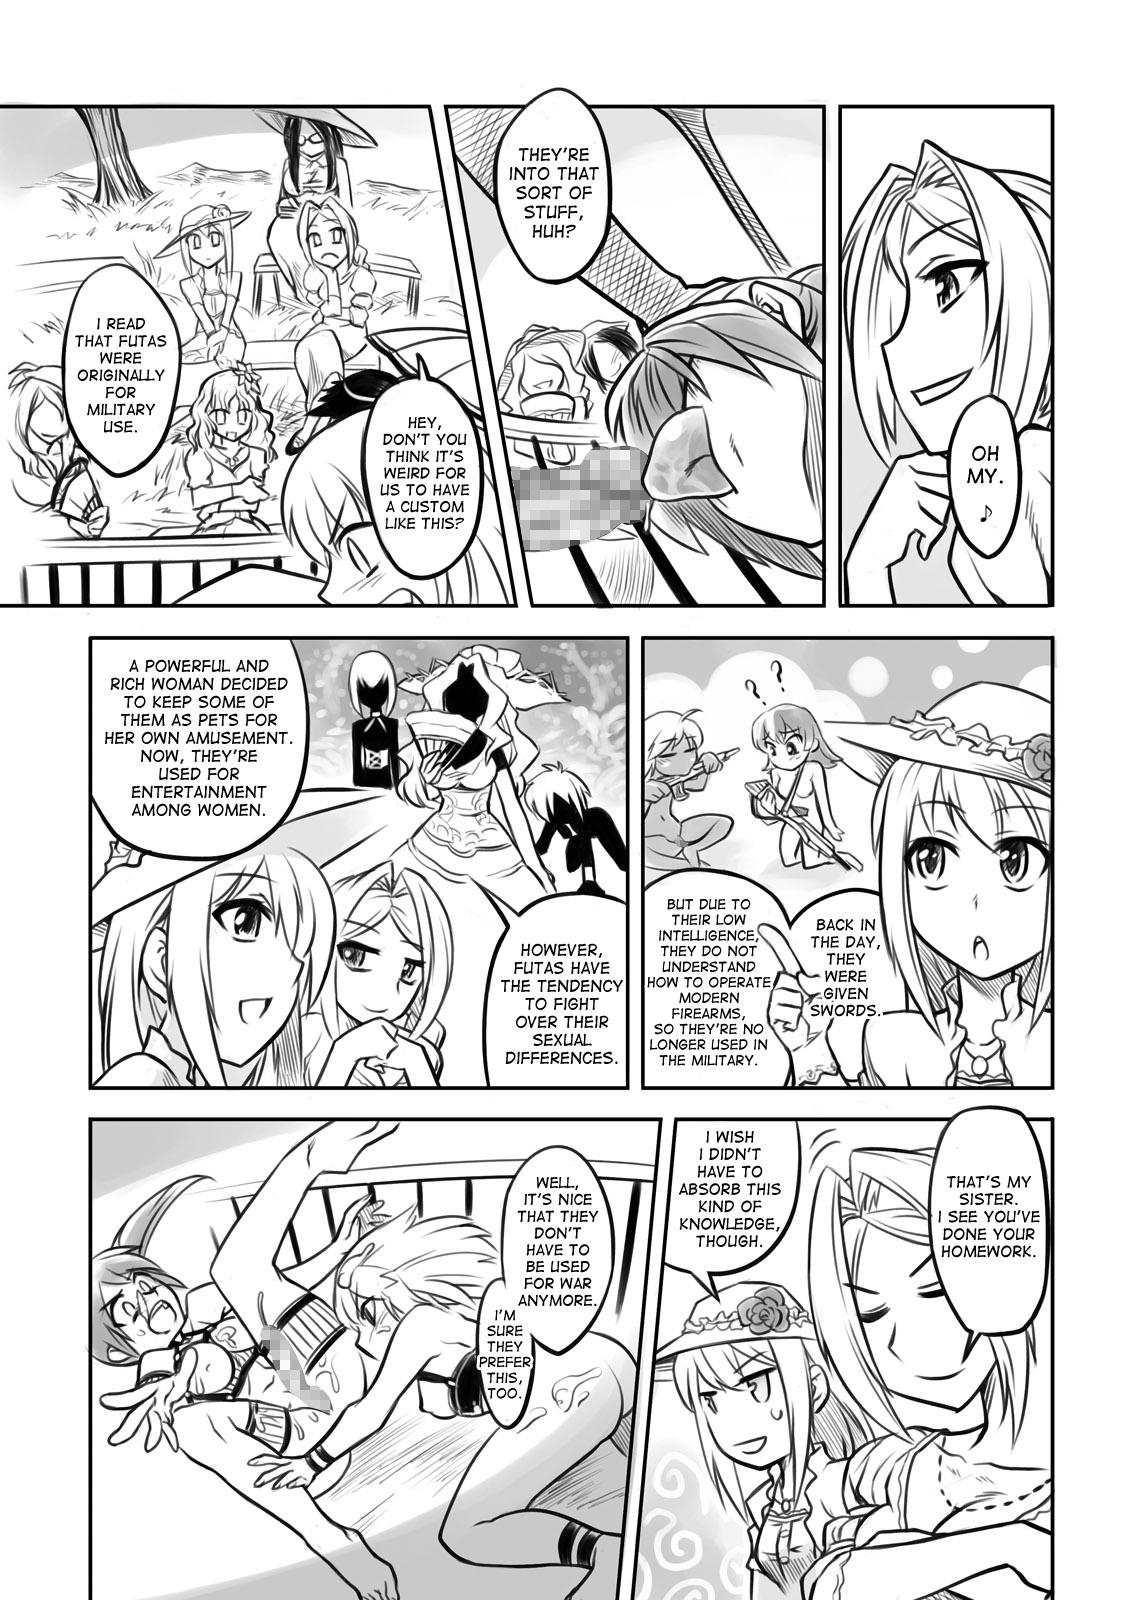 Chacal [Remora Works] FUTACOLO CO -Mare Line- VOL.001 (English) Sweet - Page 7